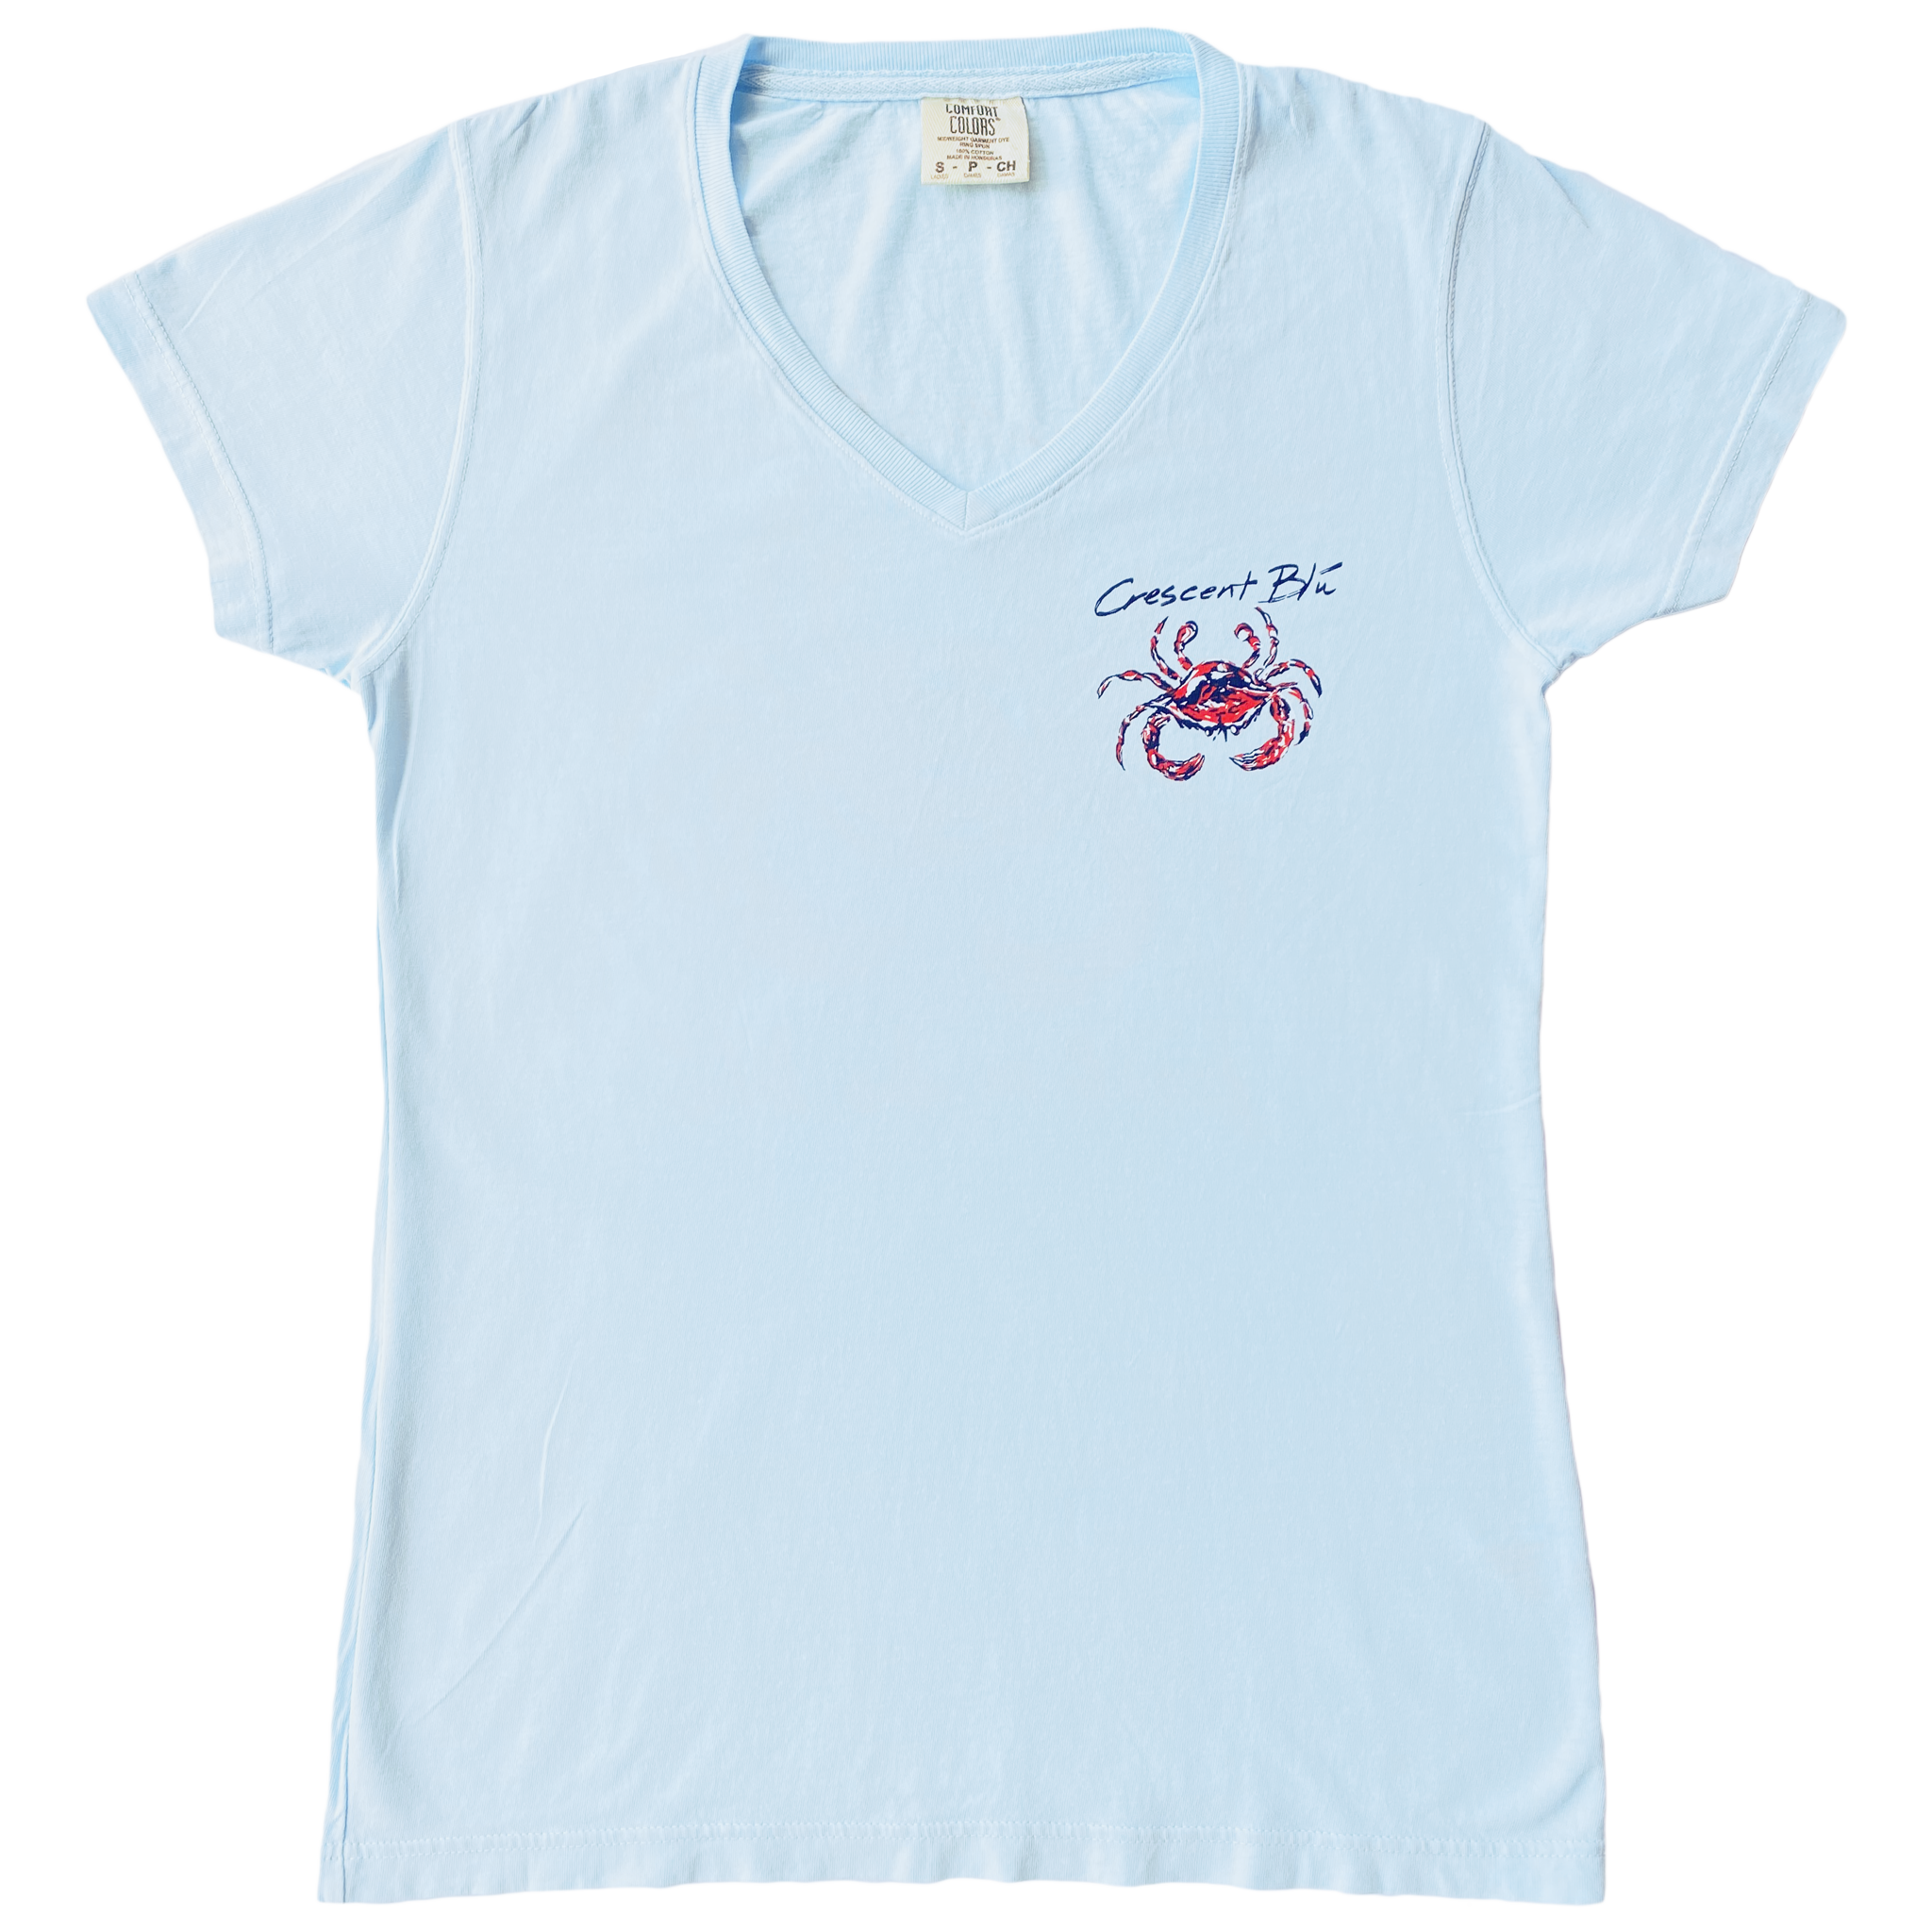 Red, White, and Blue Ladies cut V-neck Short Sleeve T-shirt